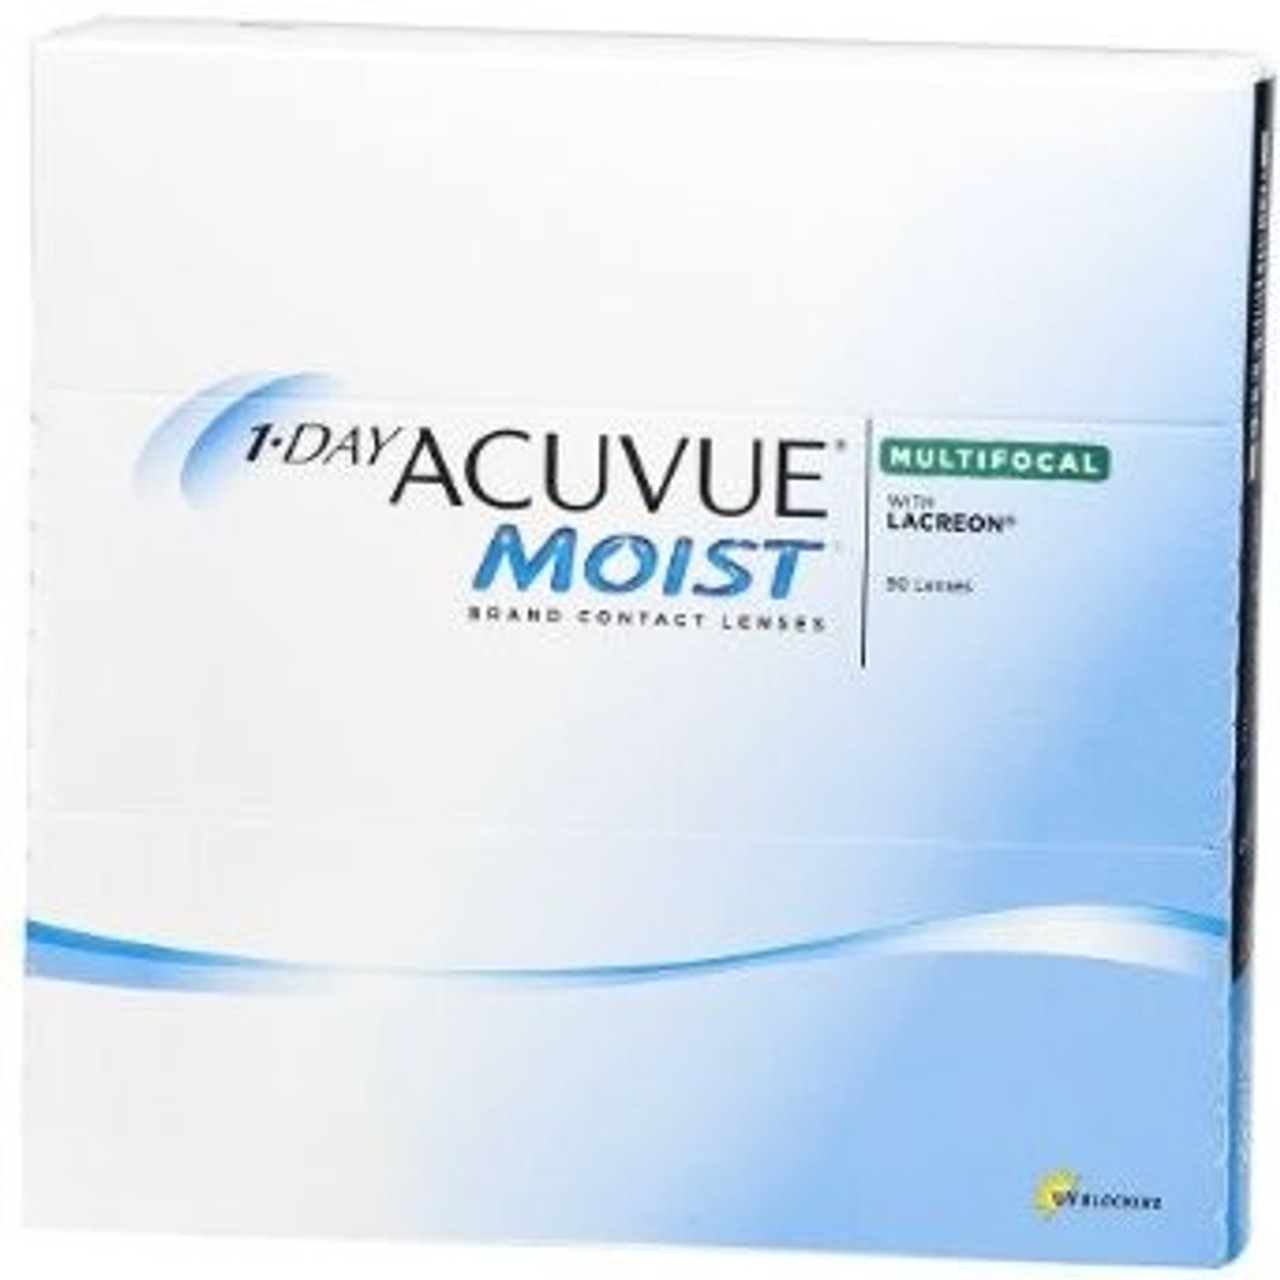 1 Day Acuvue Moist Multifocal 90 Pack 1 Day Acuvue